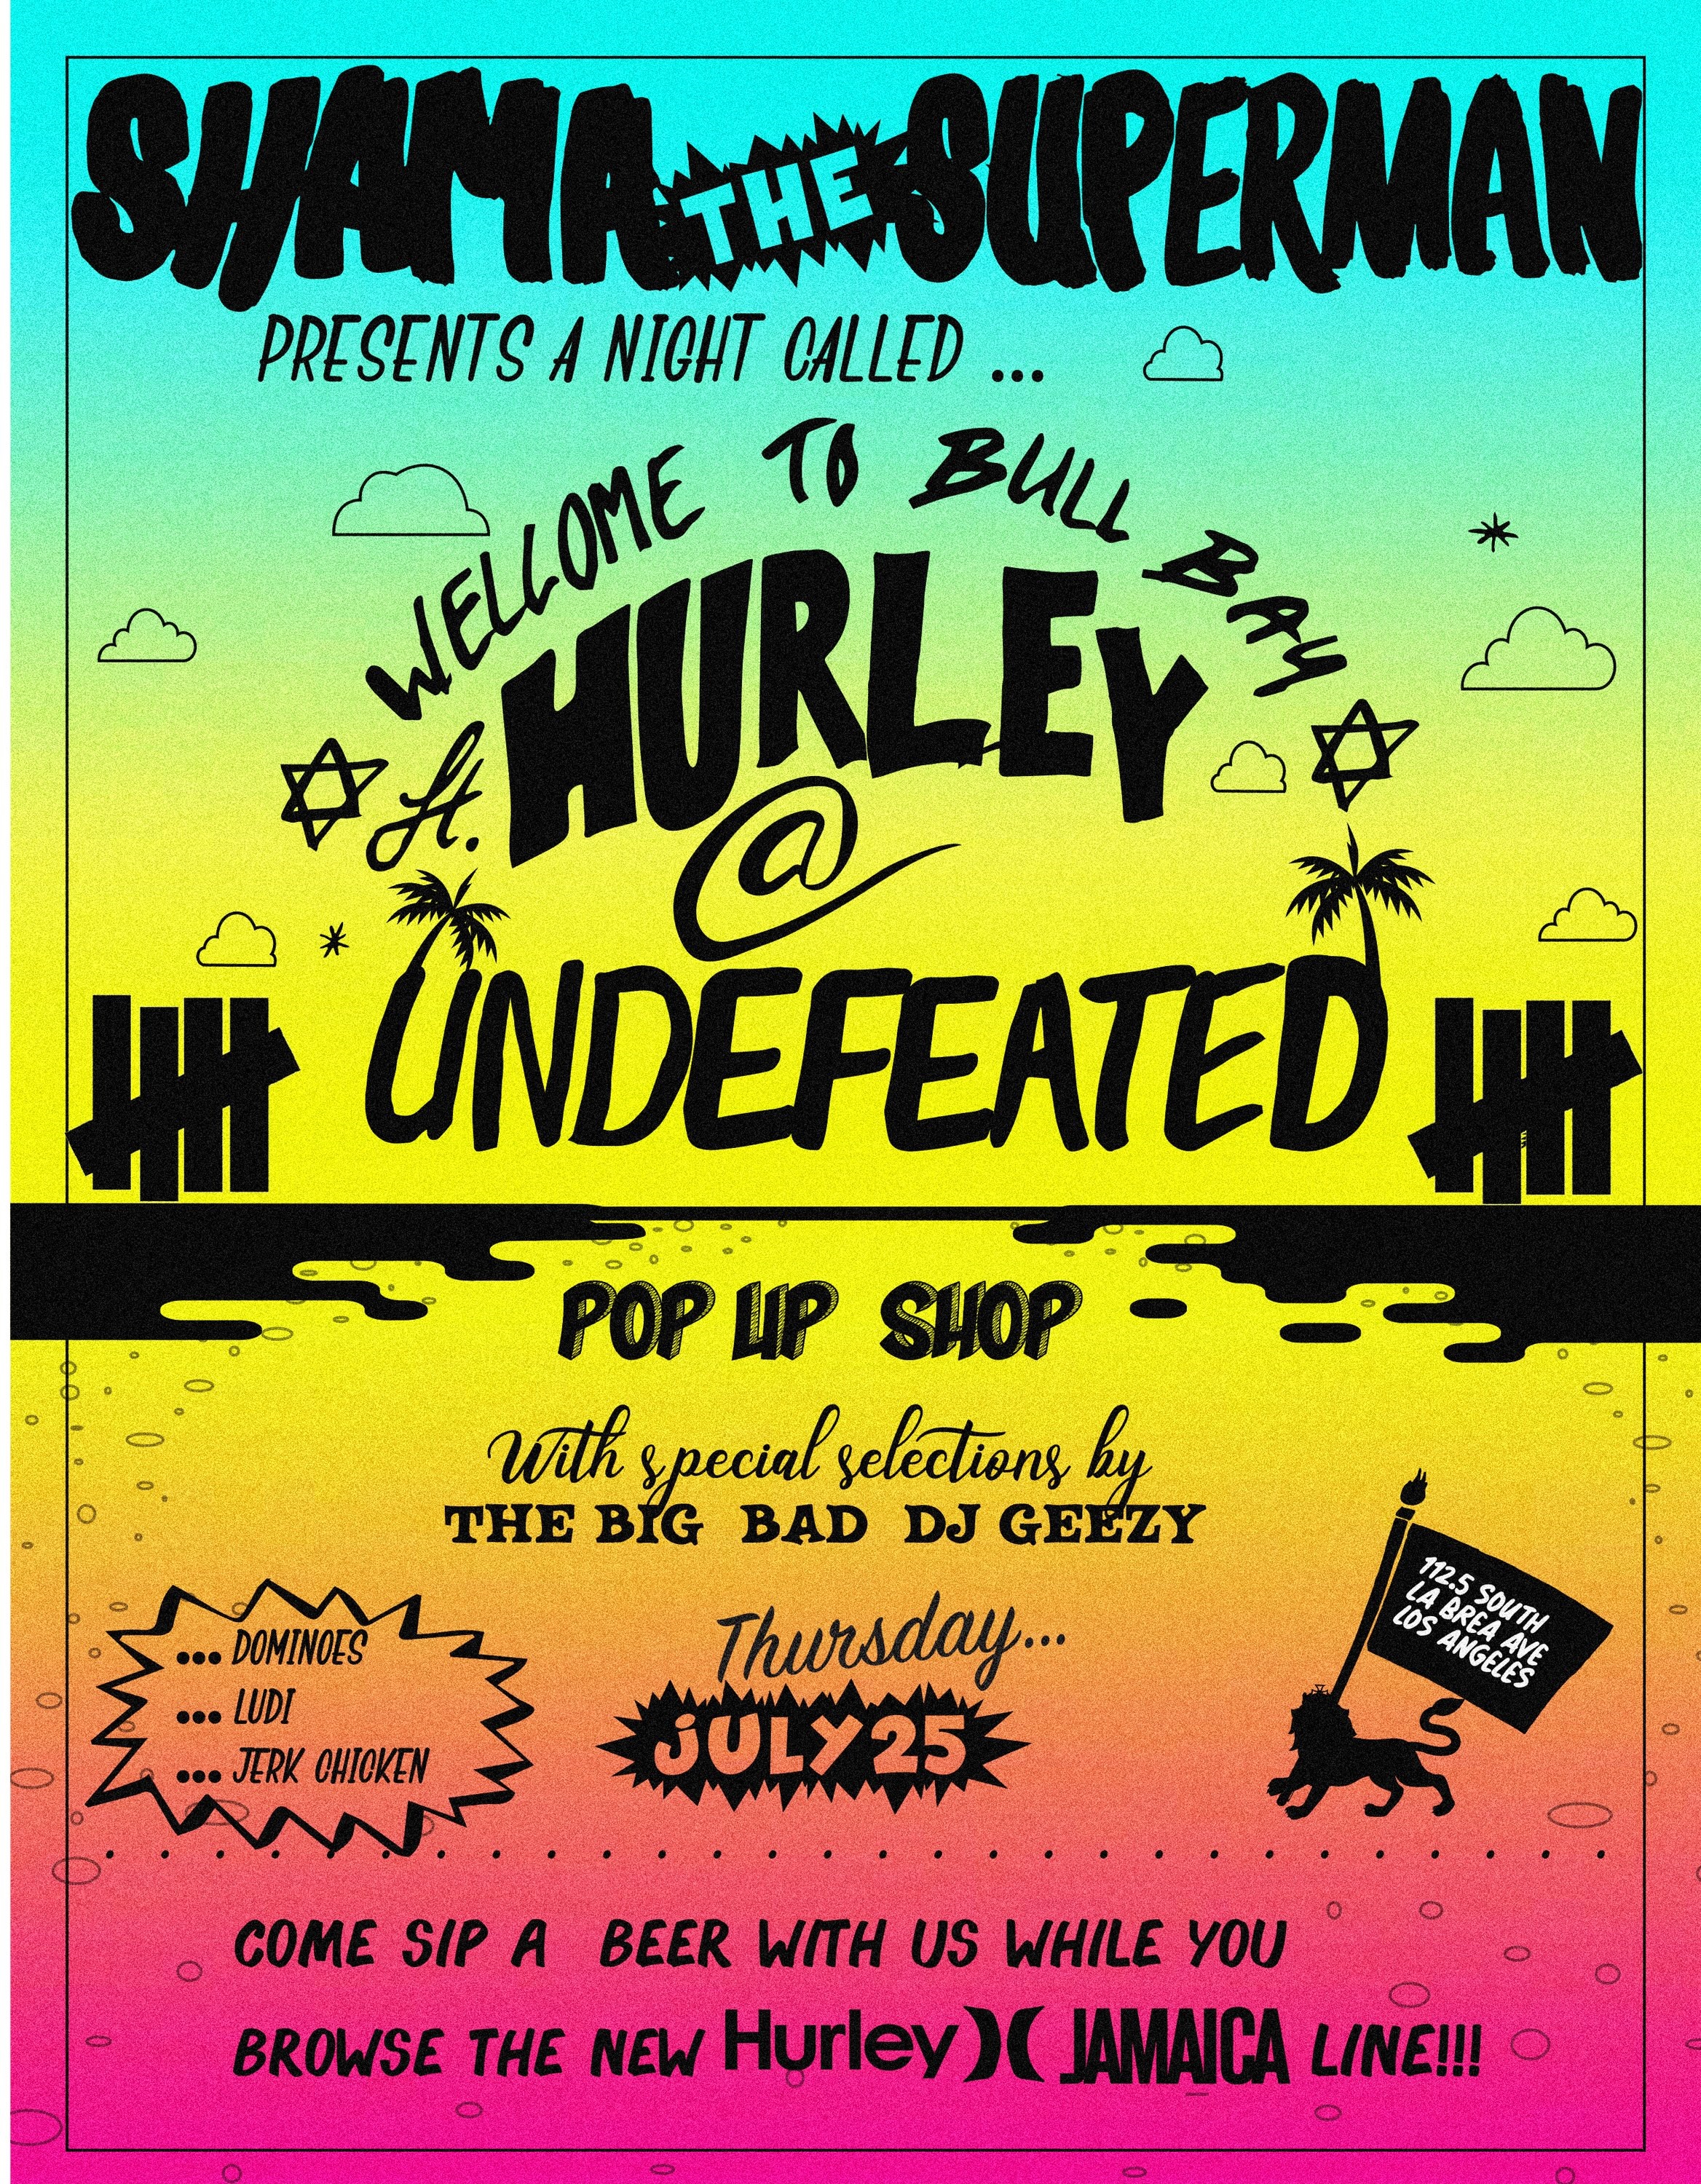 Hurley Jamaica Collection Launch Event and Pop-Up Shop at Undefeated